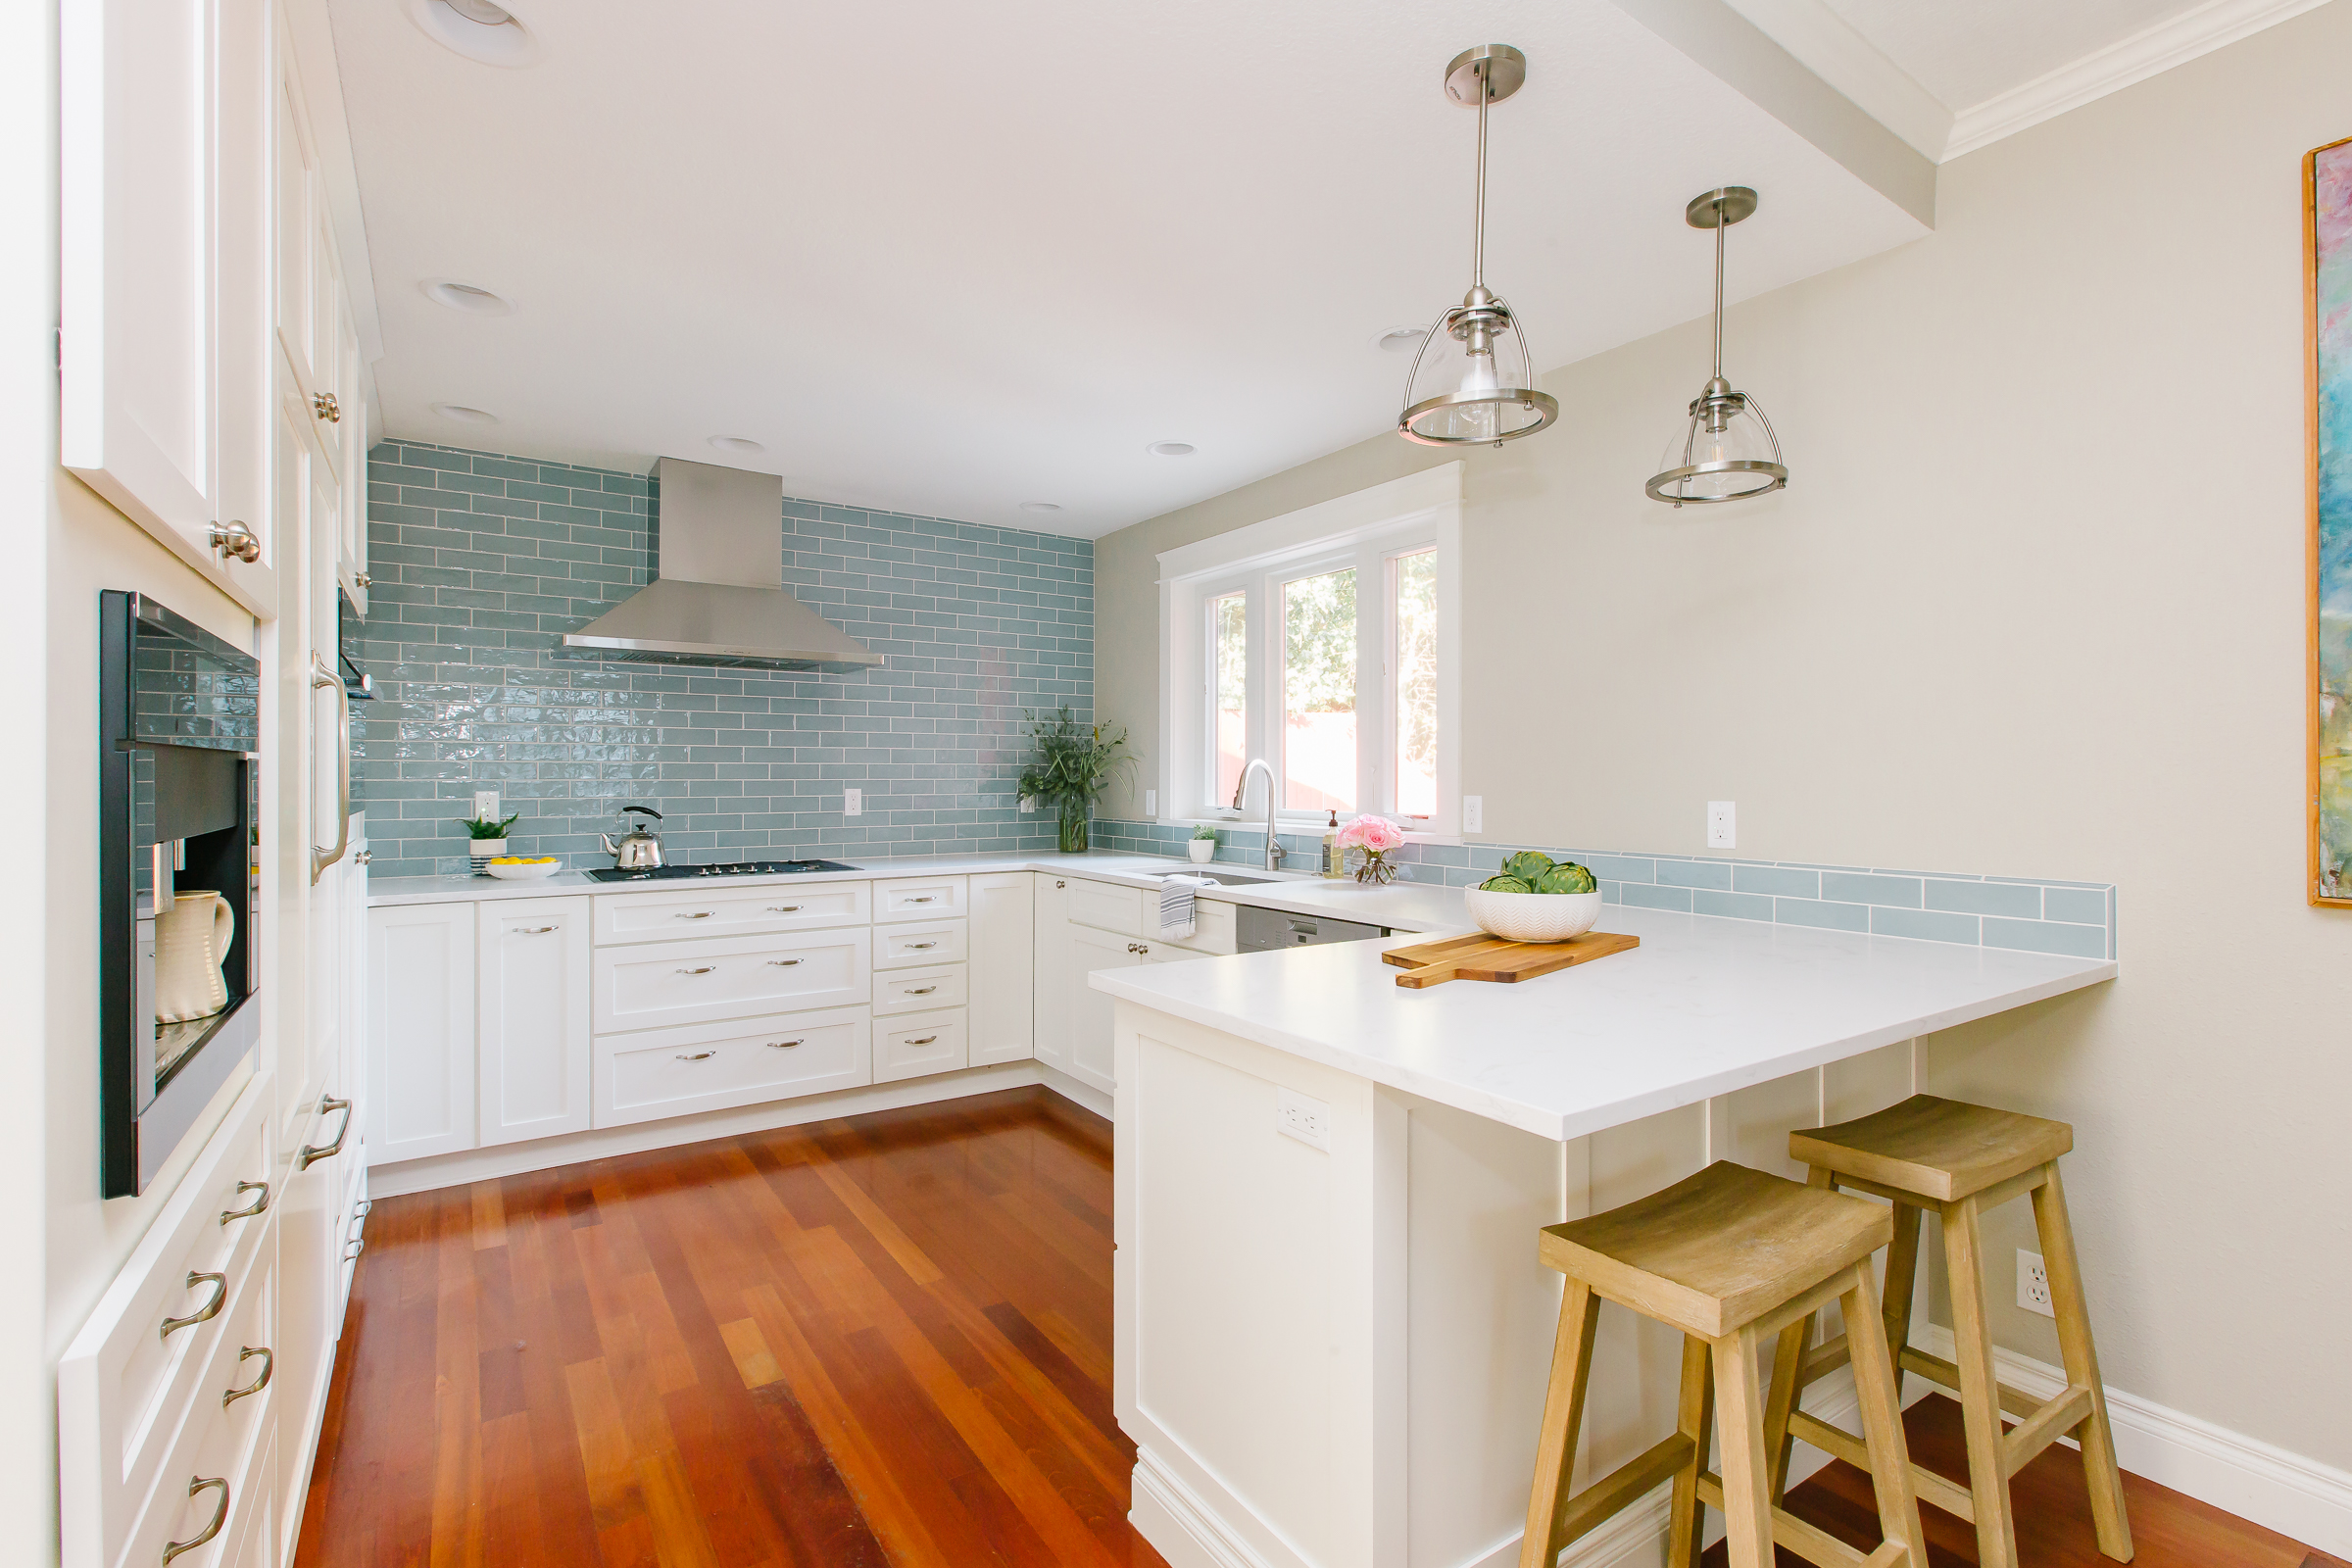 Historical home kitchen with light blue subway tile and white cabinets